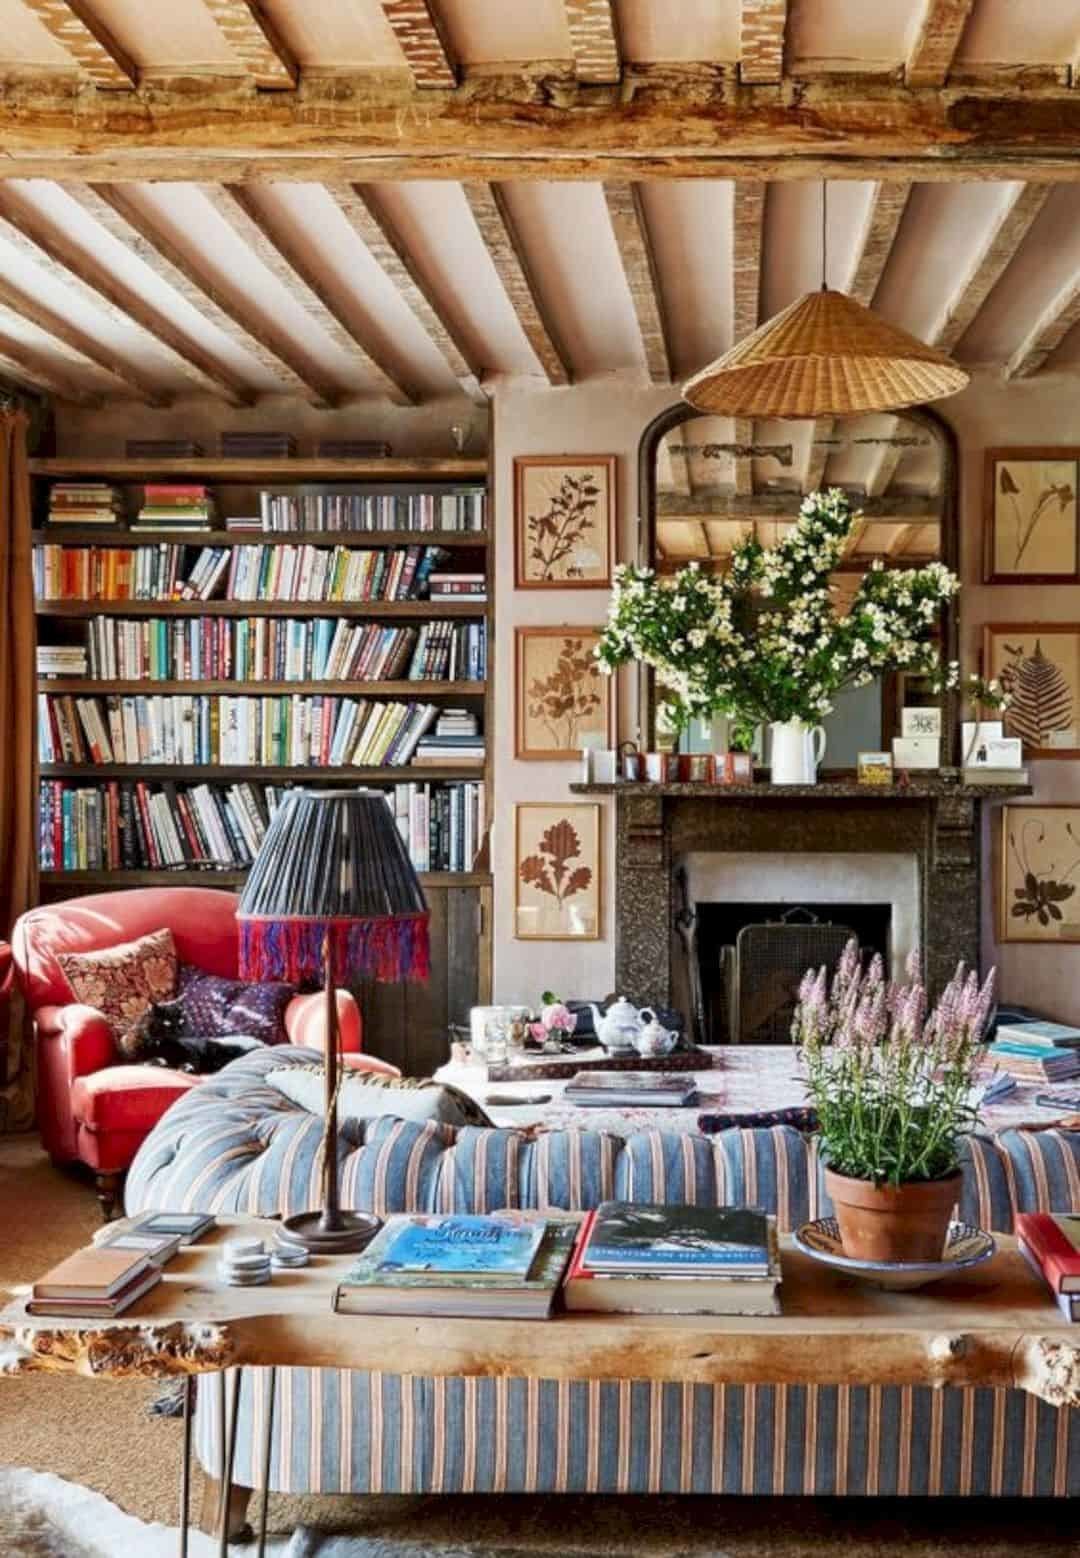 English Country Cottage | Country Homes and Manor Decor 1